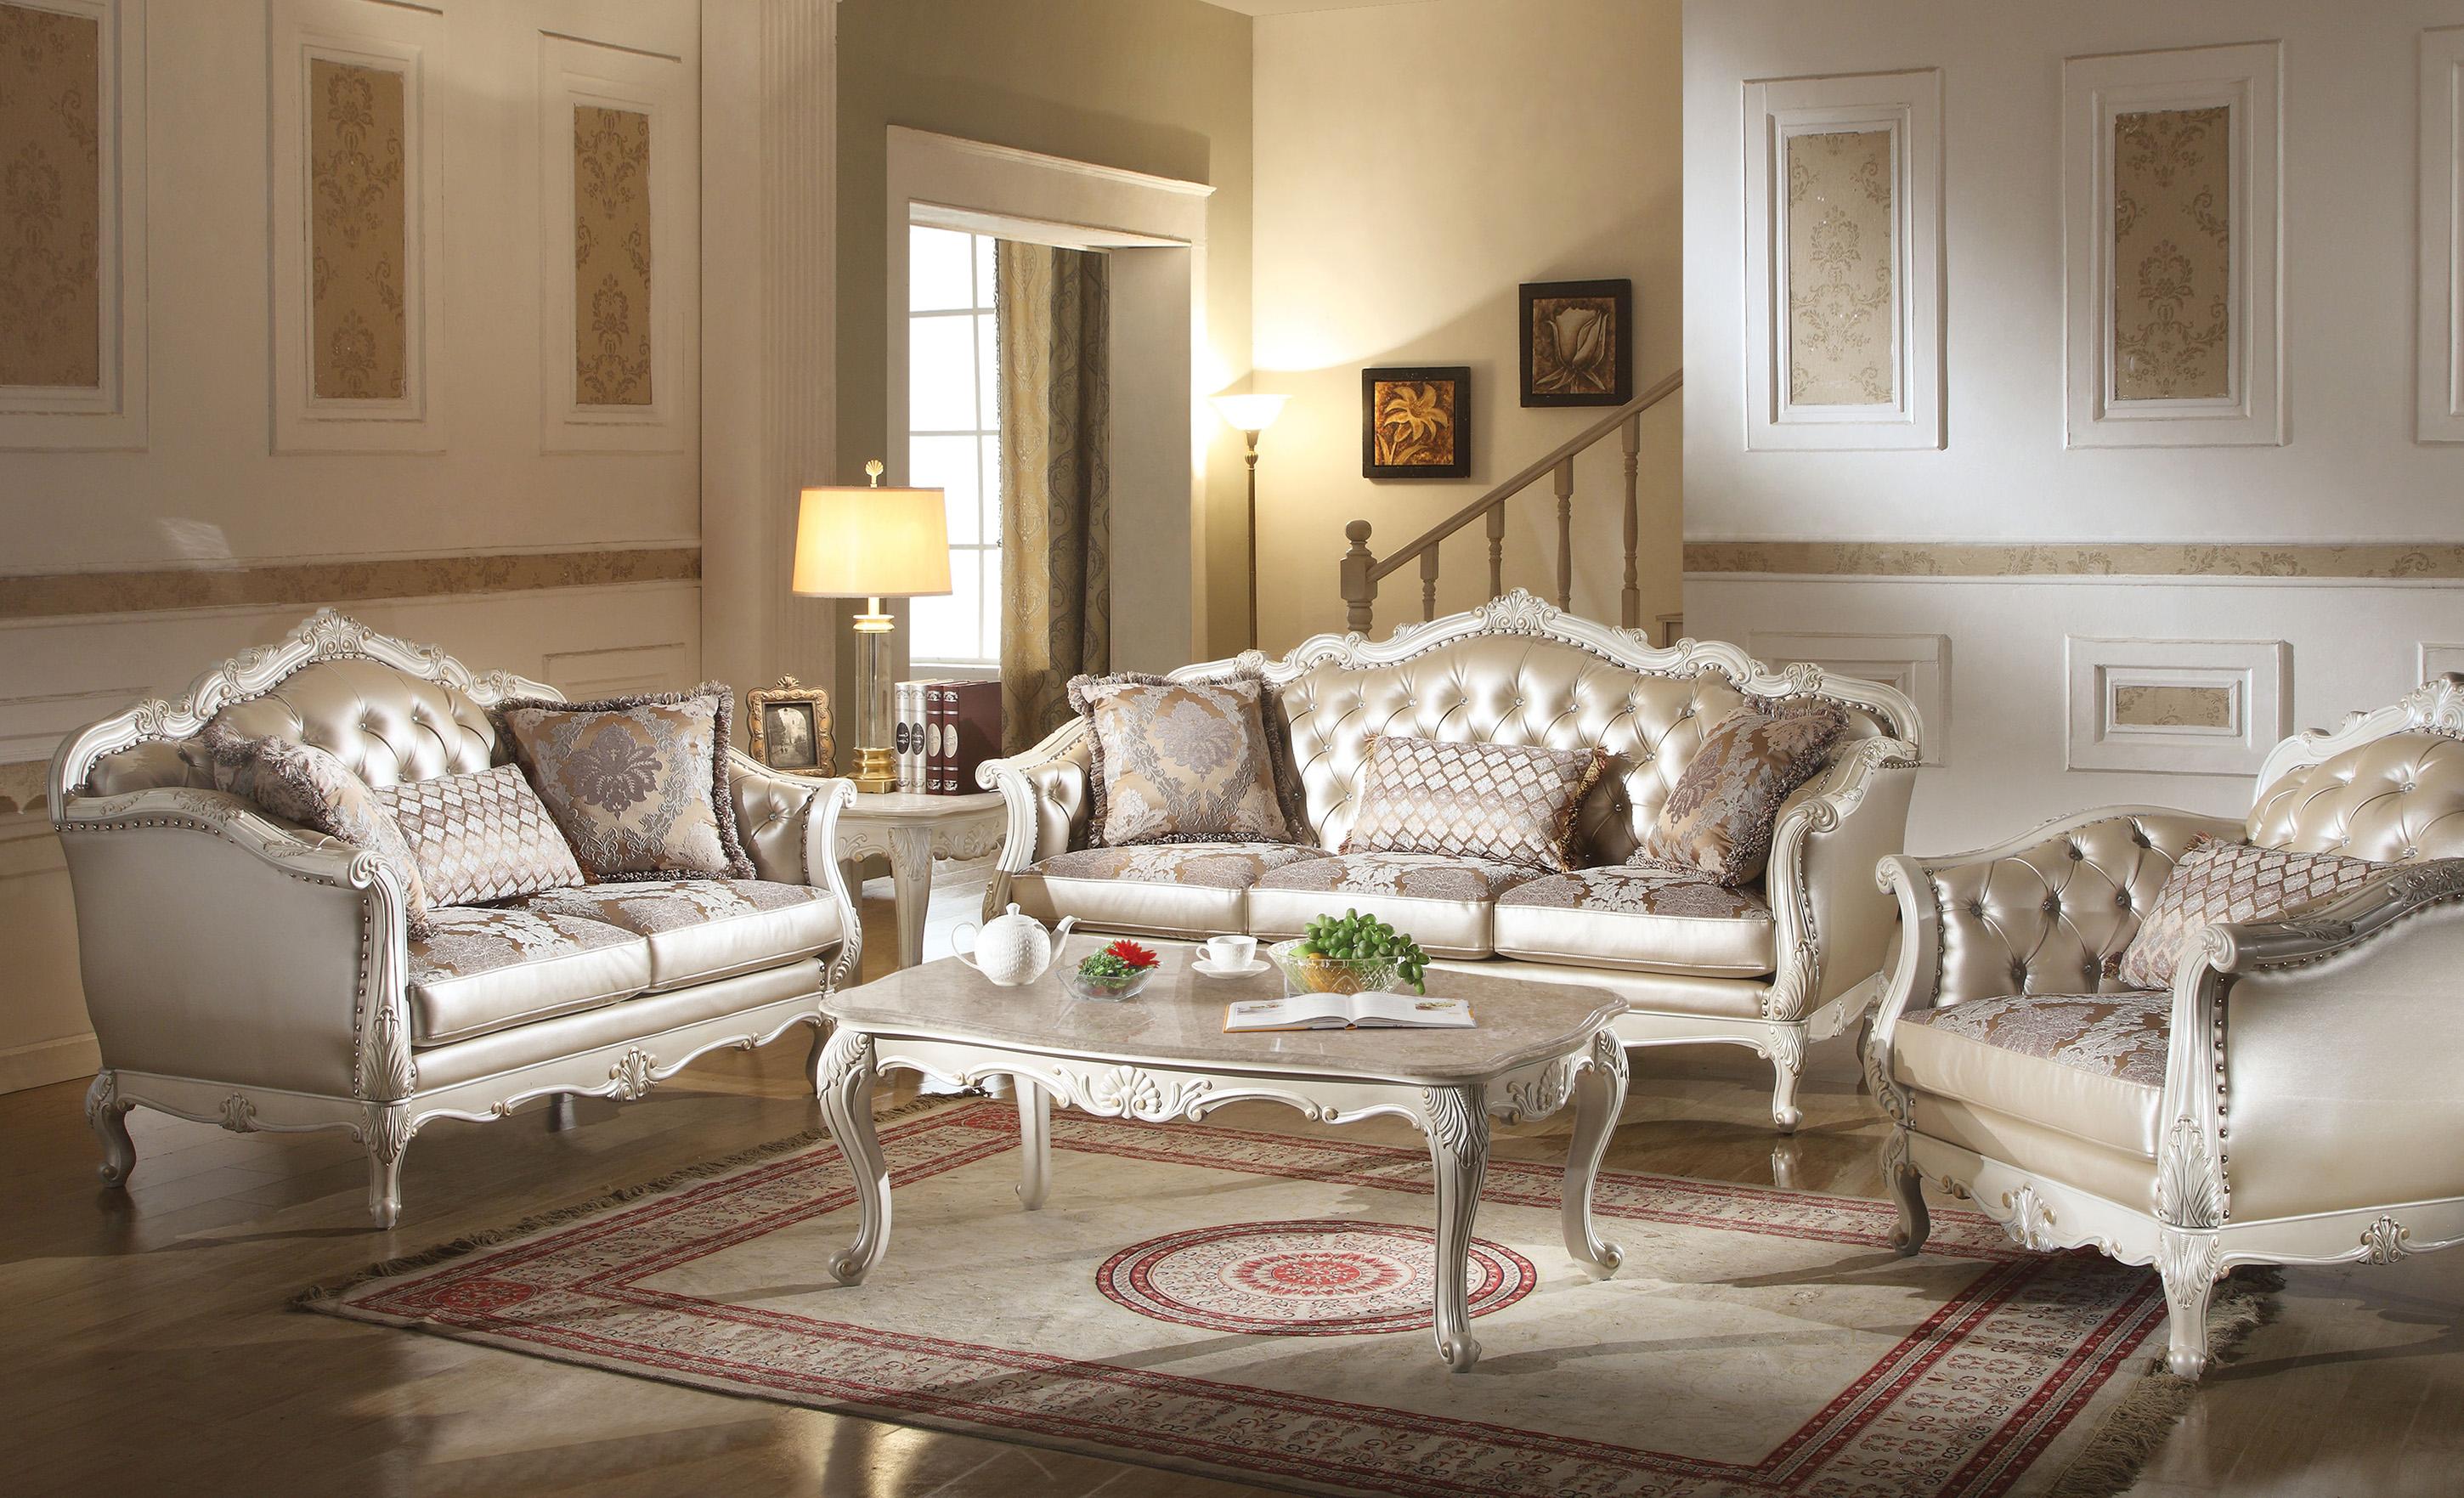 Classic, Traditional Sofa Loveseat and Table Set Chantelle 53540 53540 Chantelle-Set-5 in Pearl White, Platinum Fabric